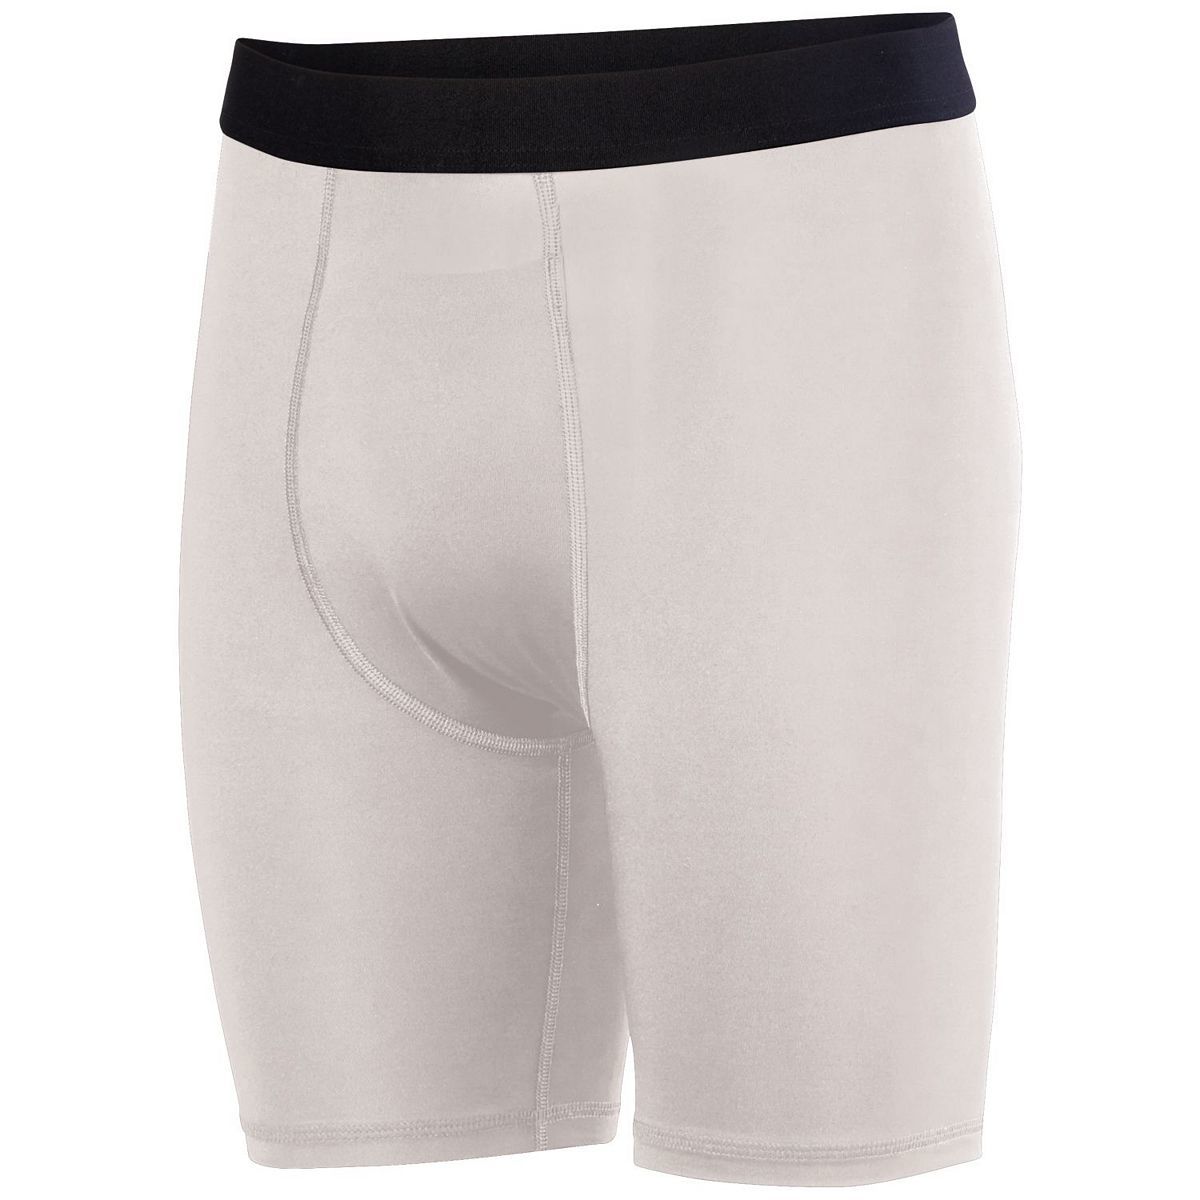 Augusta Sportswear Hyperform Compression Shorts in White  -Part of the Adult, Adult-Shorts, Augusta-Products product lines at KanaleyCreations.com